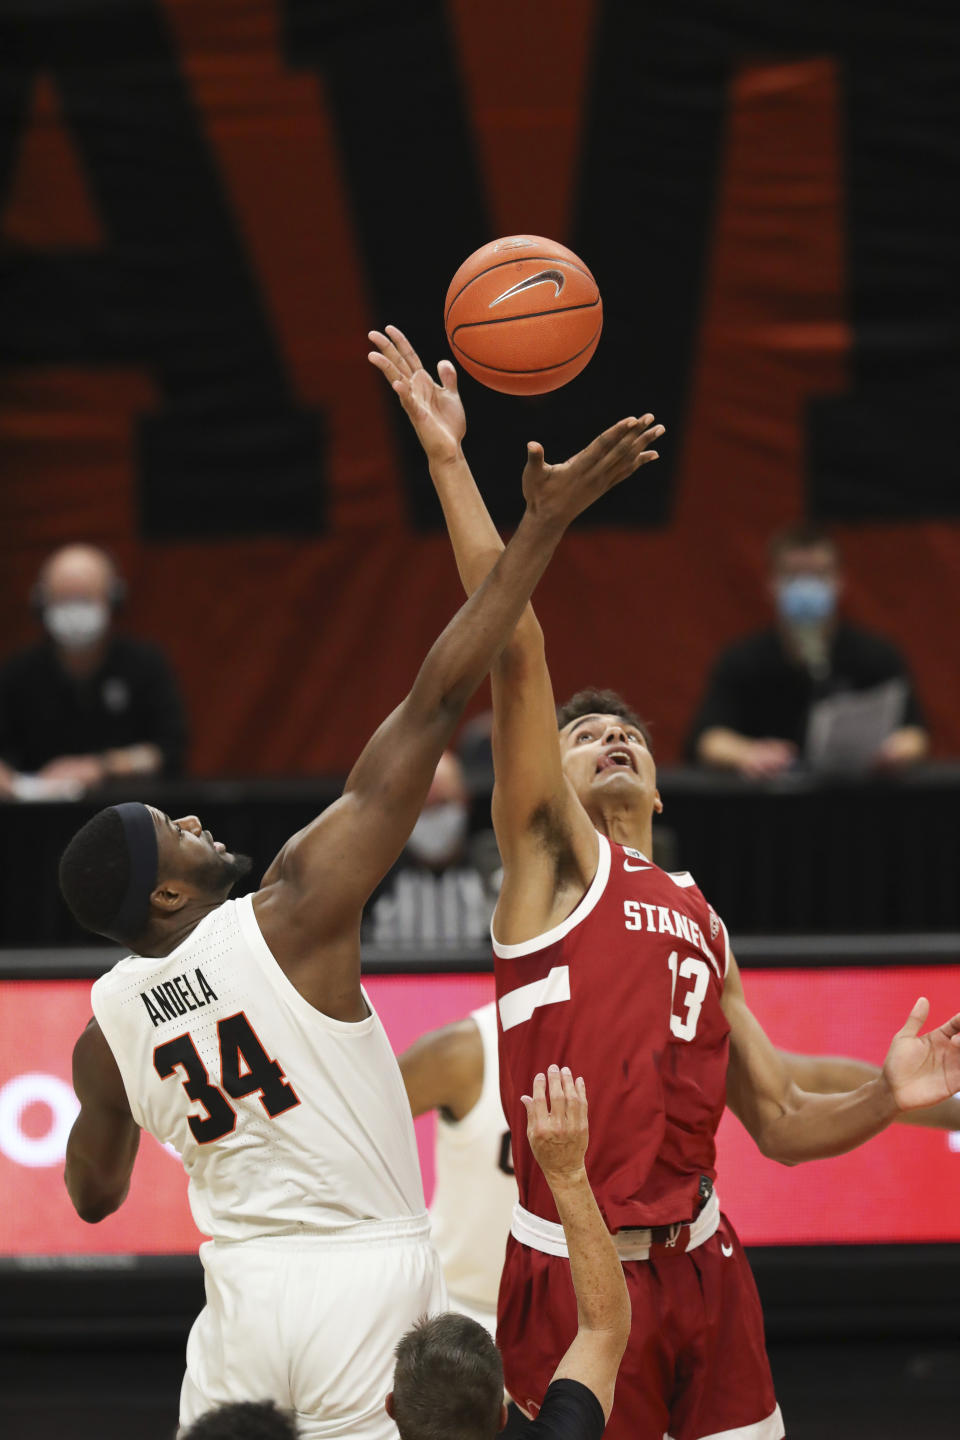 Stanford's Oscar da Silva (13) and Oregon State's Rodrigue Andela (34) go up for the tip-off during the first half of an NCAA college basketball game in Corvallis, Ore., Monday, Jan. 4, 2021. (AP Photo/Amanda Loman)